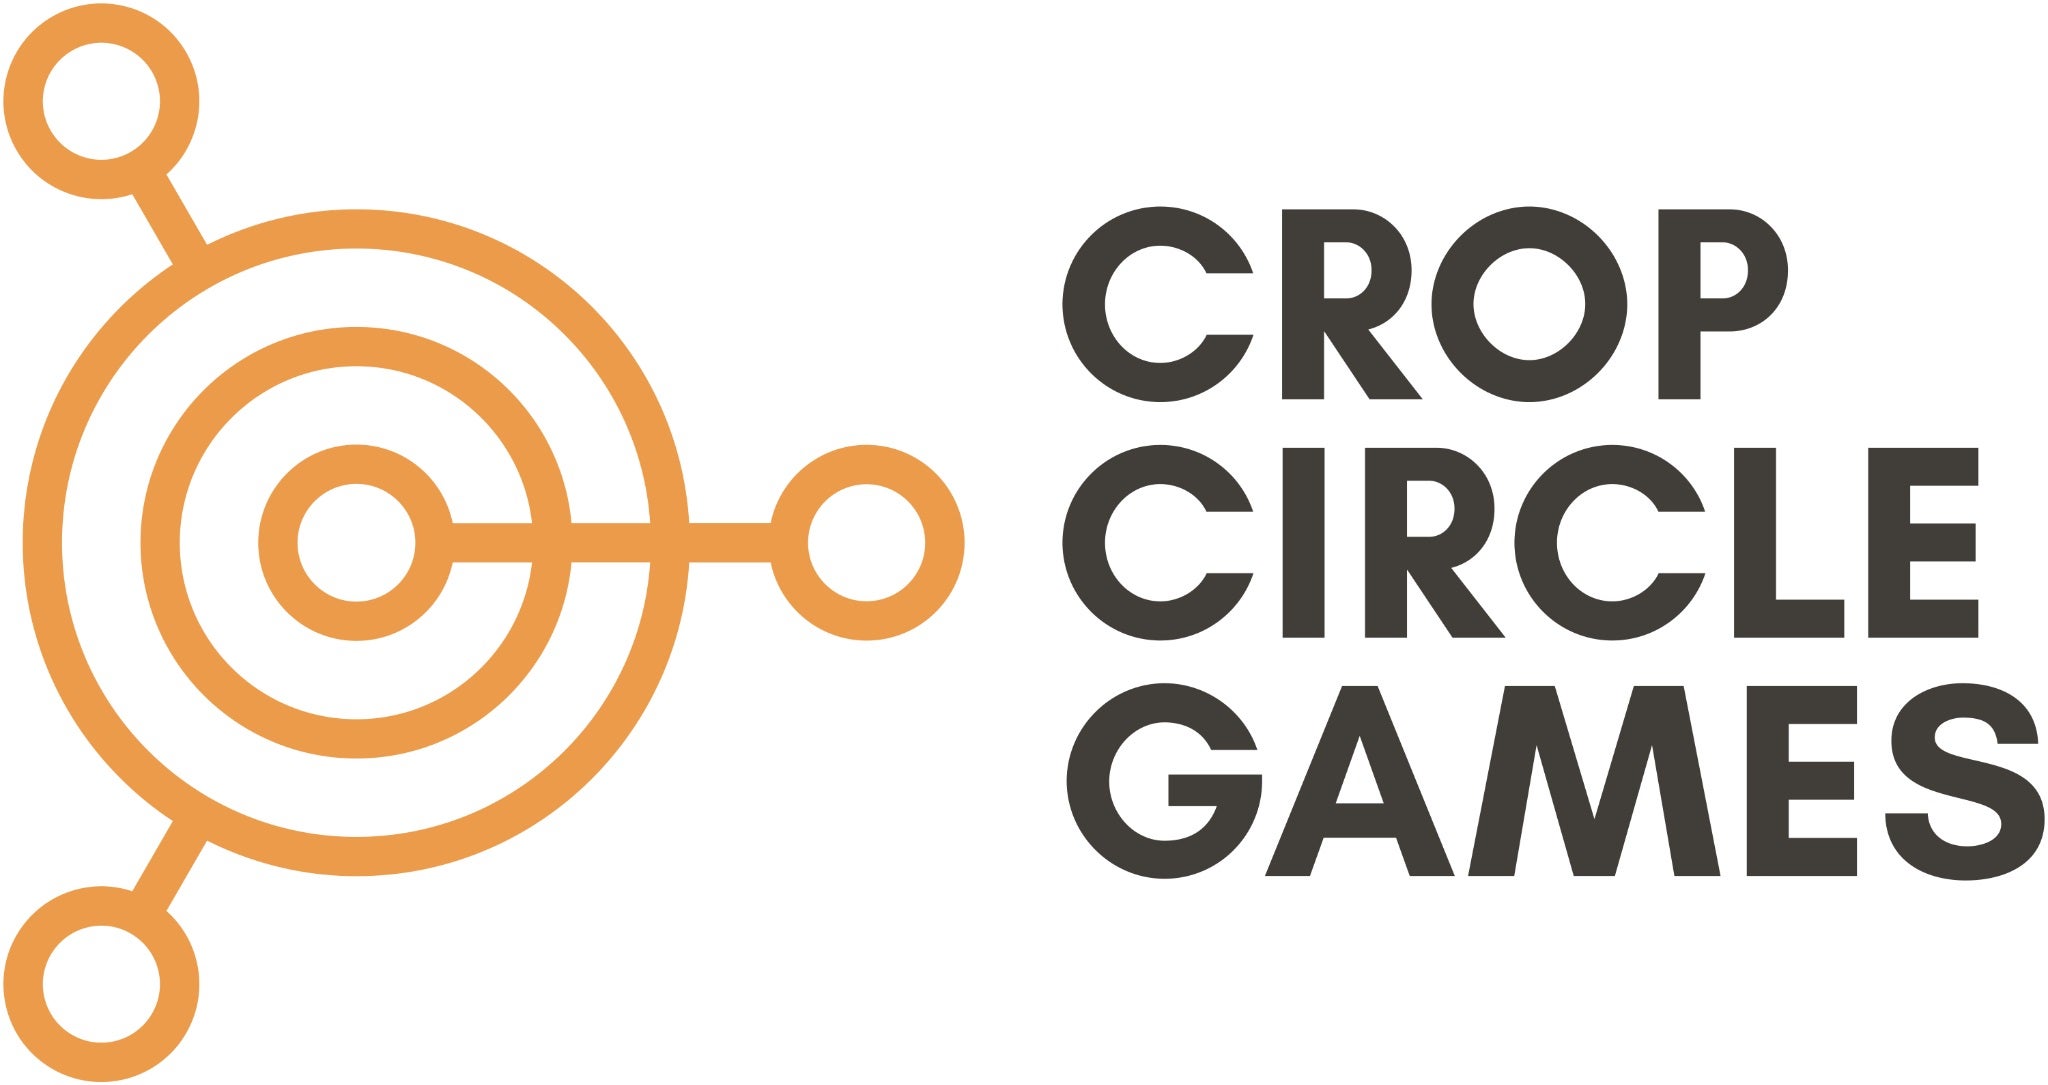 Image for Jeff Strain launches Crop Circle Games